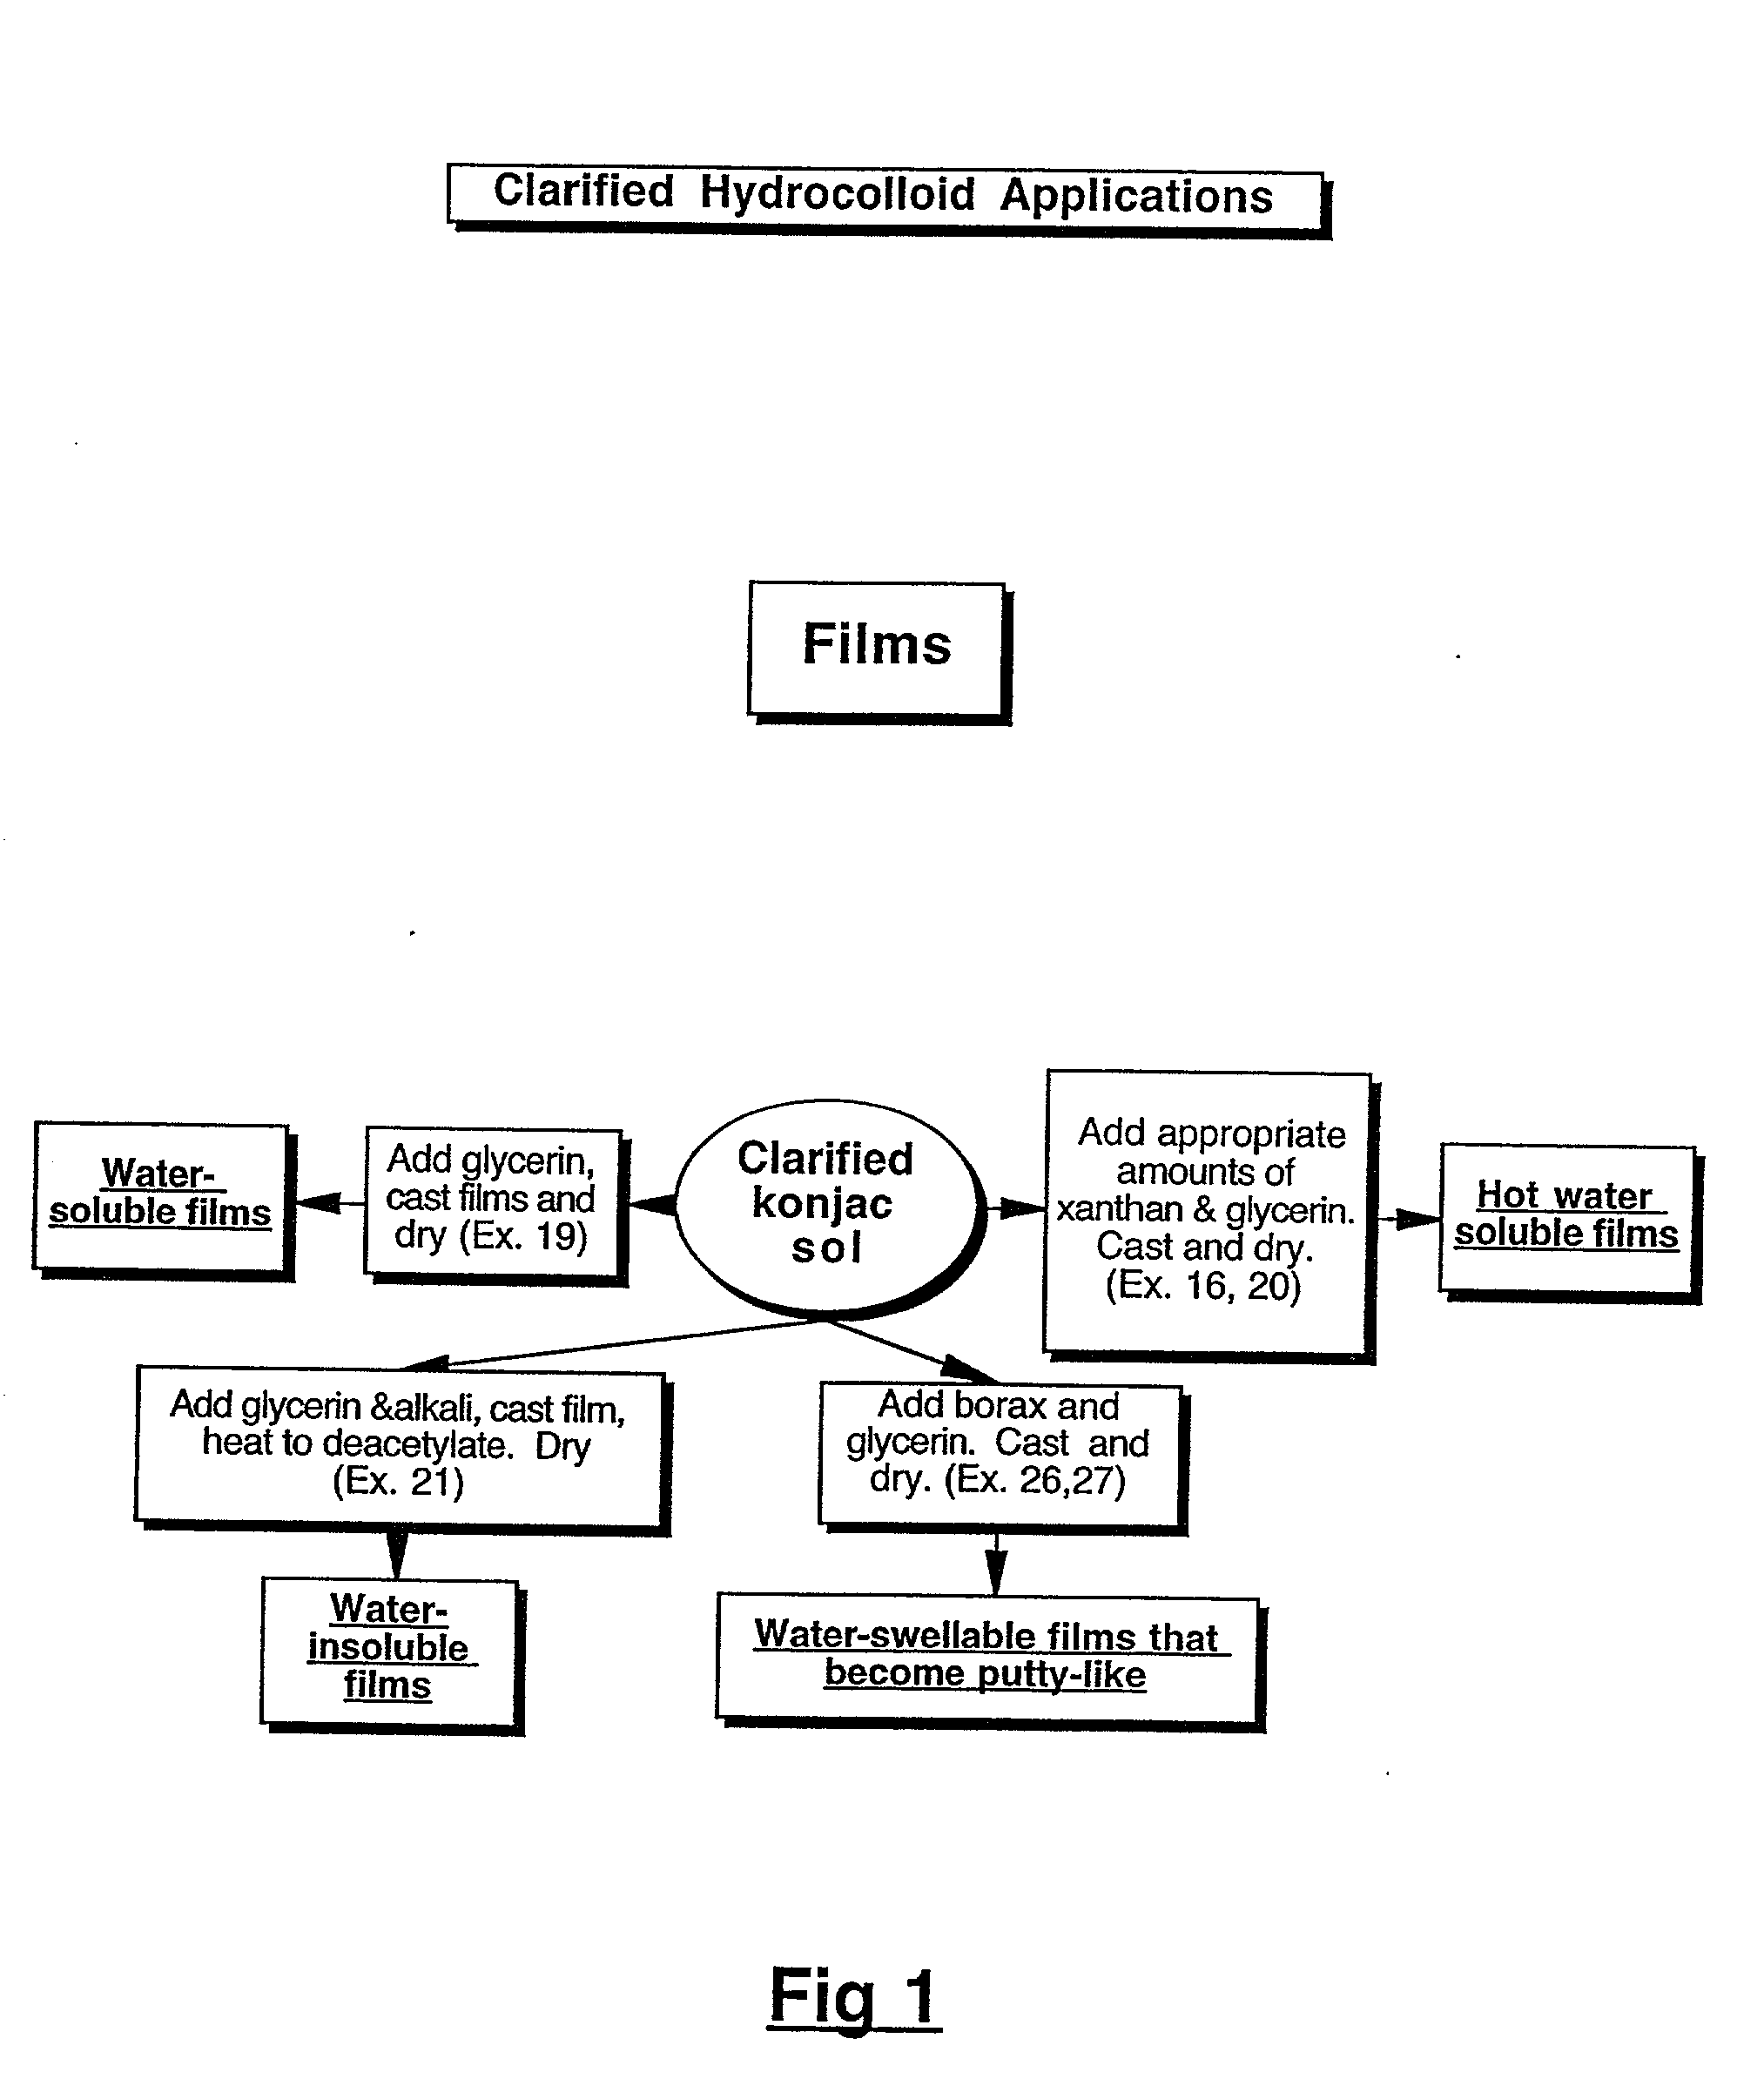 Physical forms of clarified hydrocolloids of undiminished properties and method of producing same